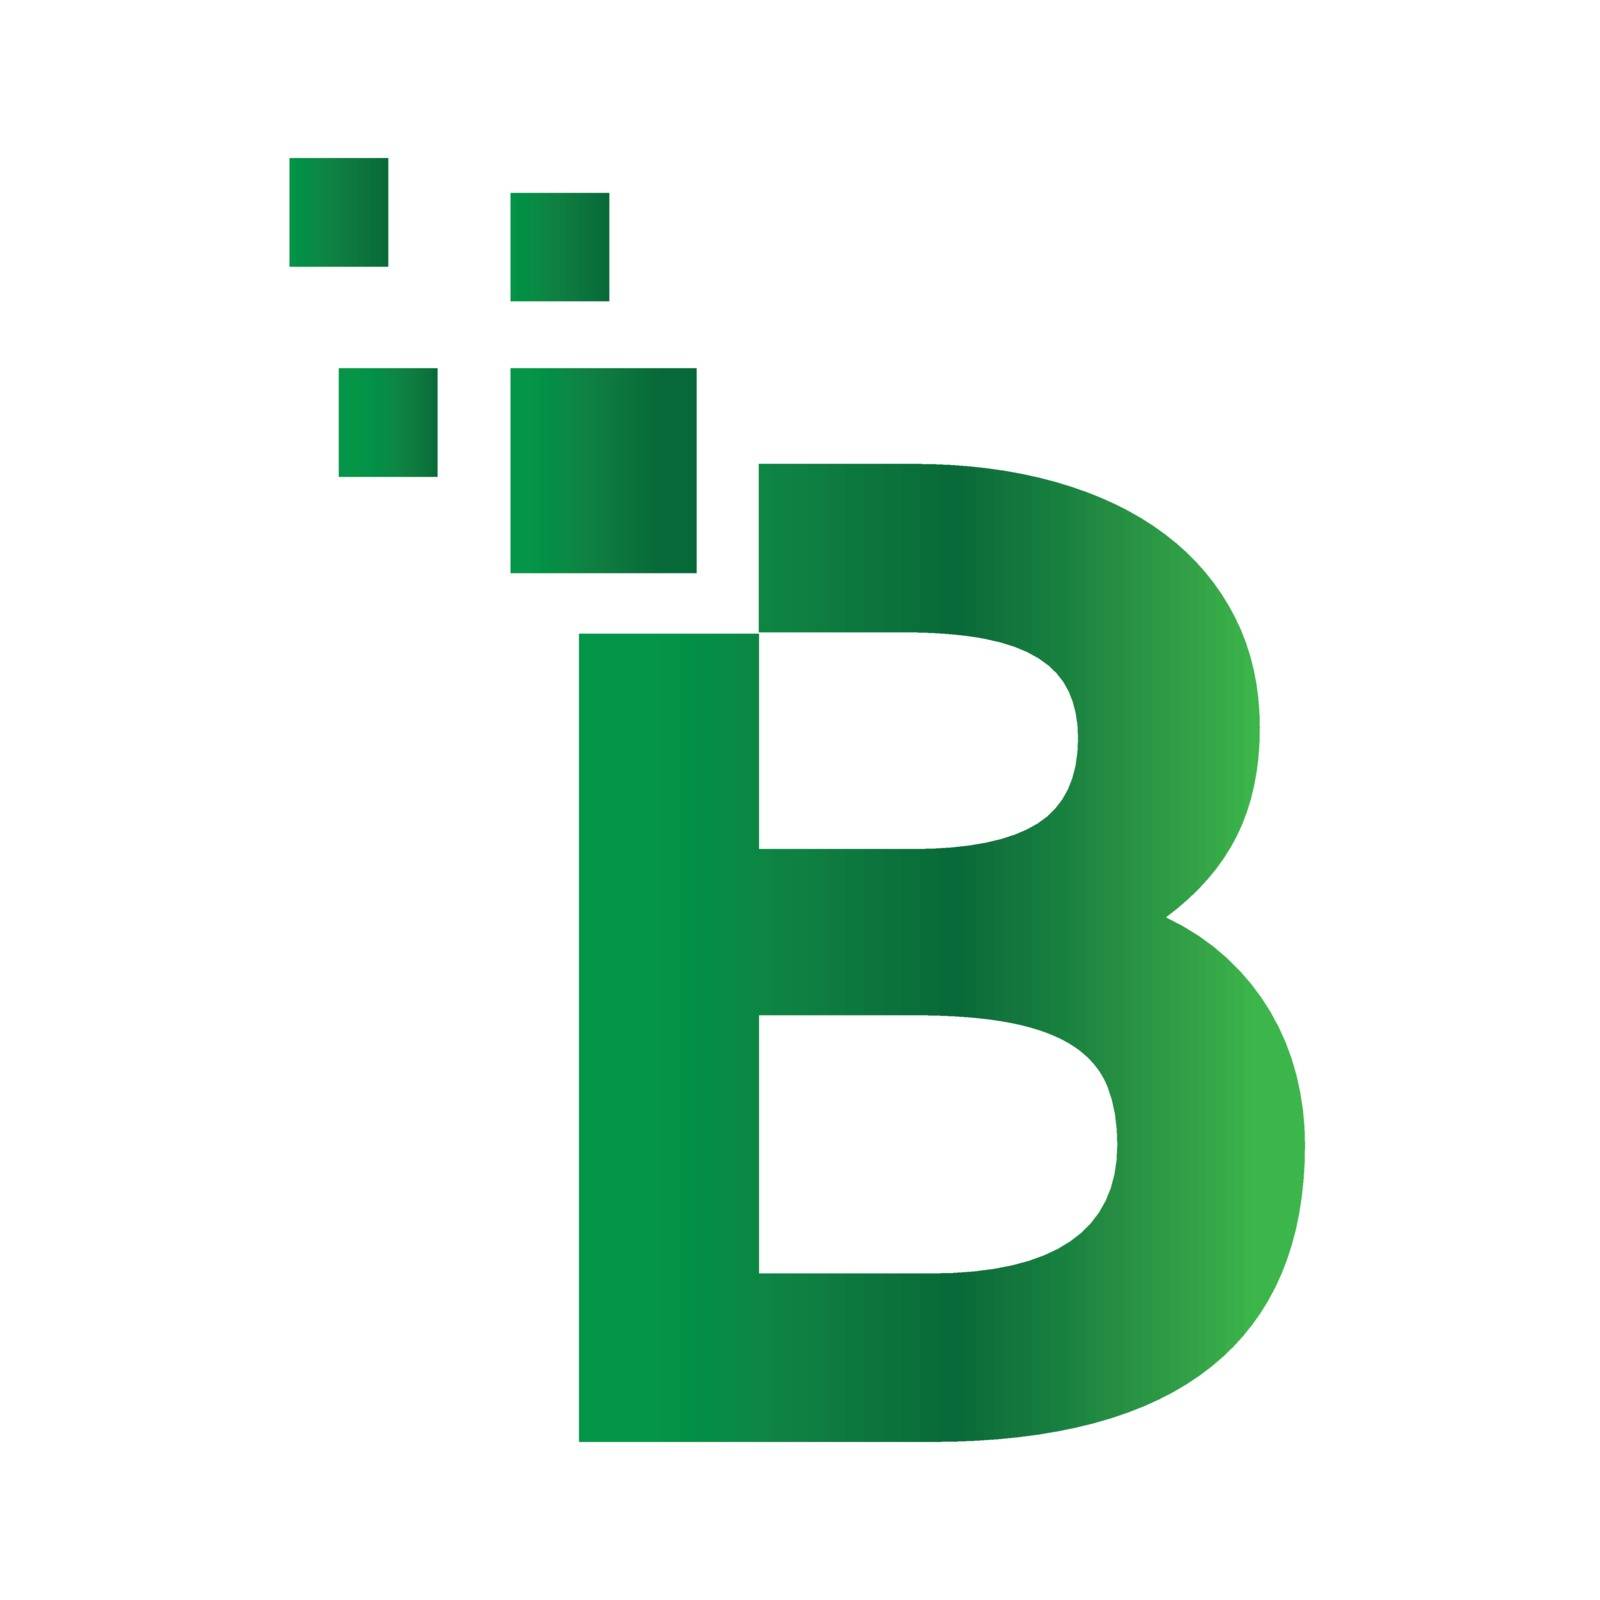 B font and icon design.